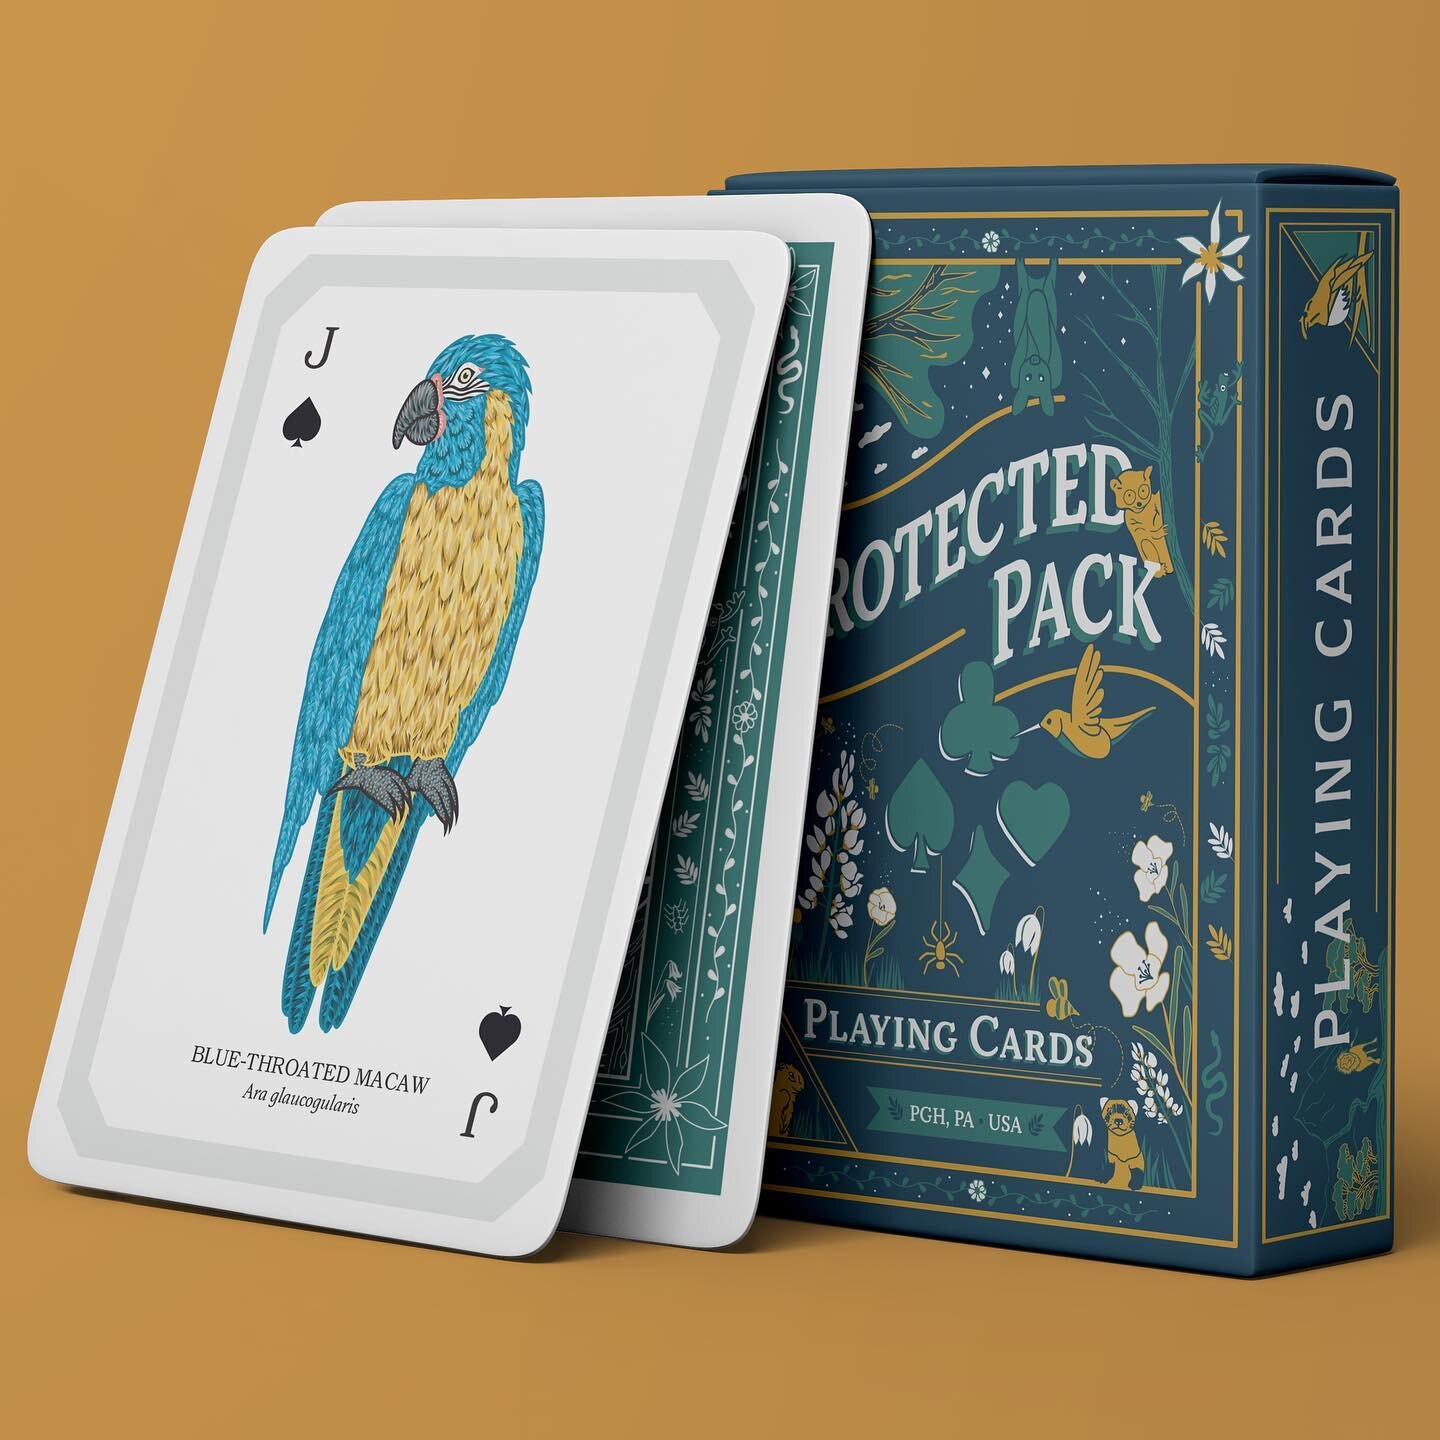 This one-eyed macaw was just one of the many ways we tried to stay true traditional card design. While deck designs vary, there are a lot of themes and details that reappear, like one-eyed jacks. While these aren&rsquo;t always required for usability